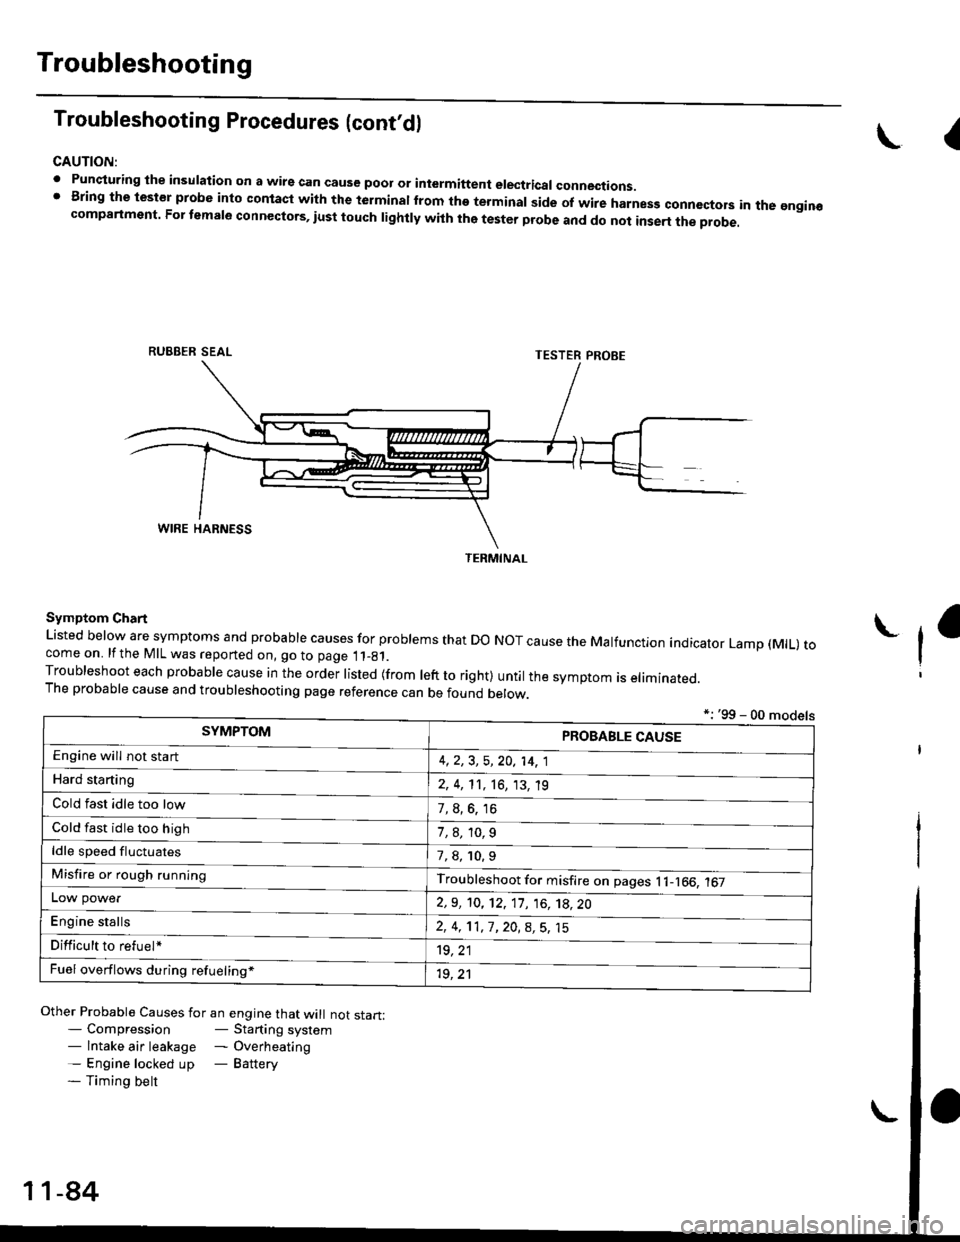 HONDA CIVIC 2000 6.G Workshop Manual Troubleshooting
Troubleshooting Procedures (cont,dl
CAUTION:
. Punqturing ihe insulation on a wirs can cause poor or intermiftent electricar connections.I Bring the test€r probe into contacl with th